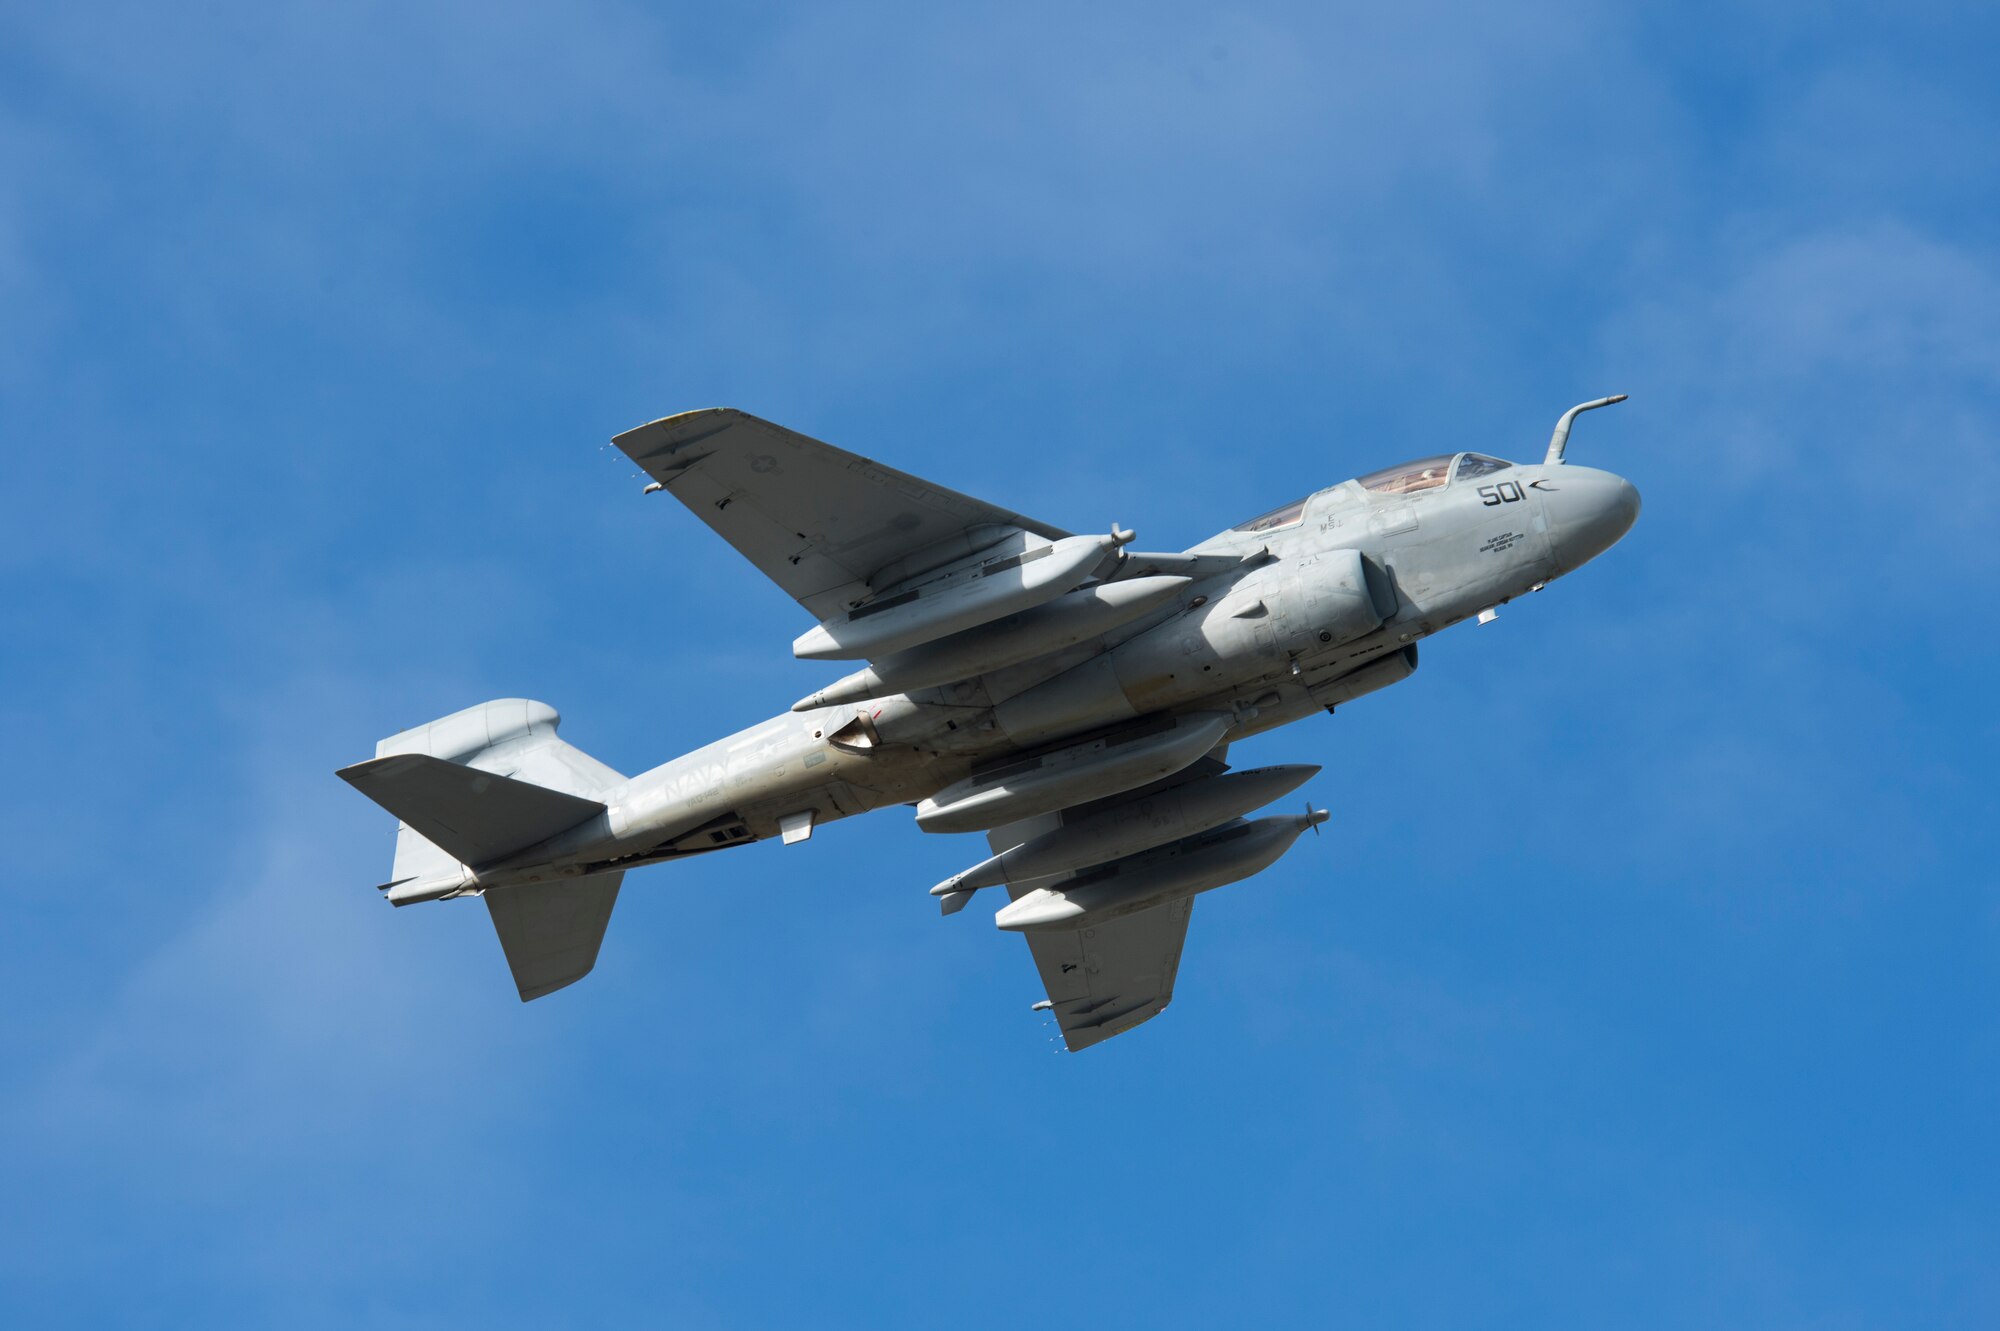 A U.S. Navy EA-6B Prowler assigned to Electronic Attack Squadron 142, Naval Air Station Whidbey Island, Wash., takes off for a sortie during RED FLAG-Alaska 14-1 May 20, 2014, Eielson Air Force Base, Alaska. The EA-6B's primary mission is to support ground attack operations by disrupting enemy electromagnetic activity within the airspace. (U.S. Air Force photo by Senior Airman Peter Reft/Released)